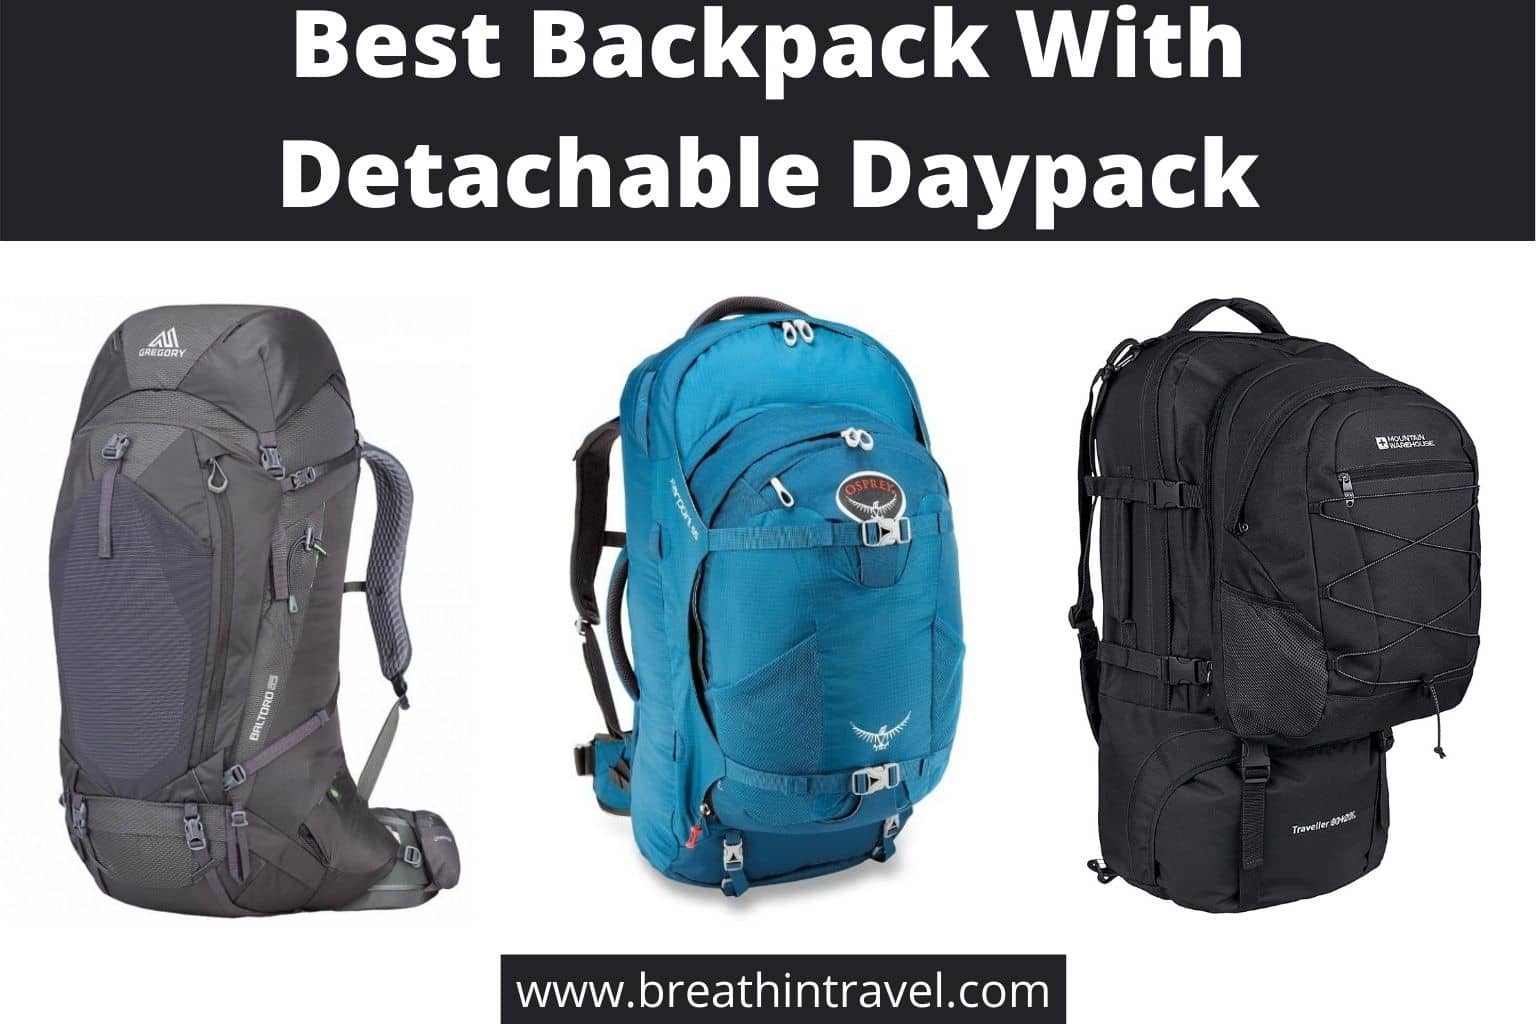 Best Backpack With Detachable Daypack + Rain Cover